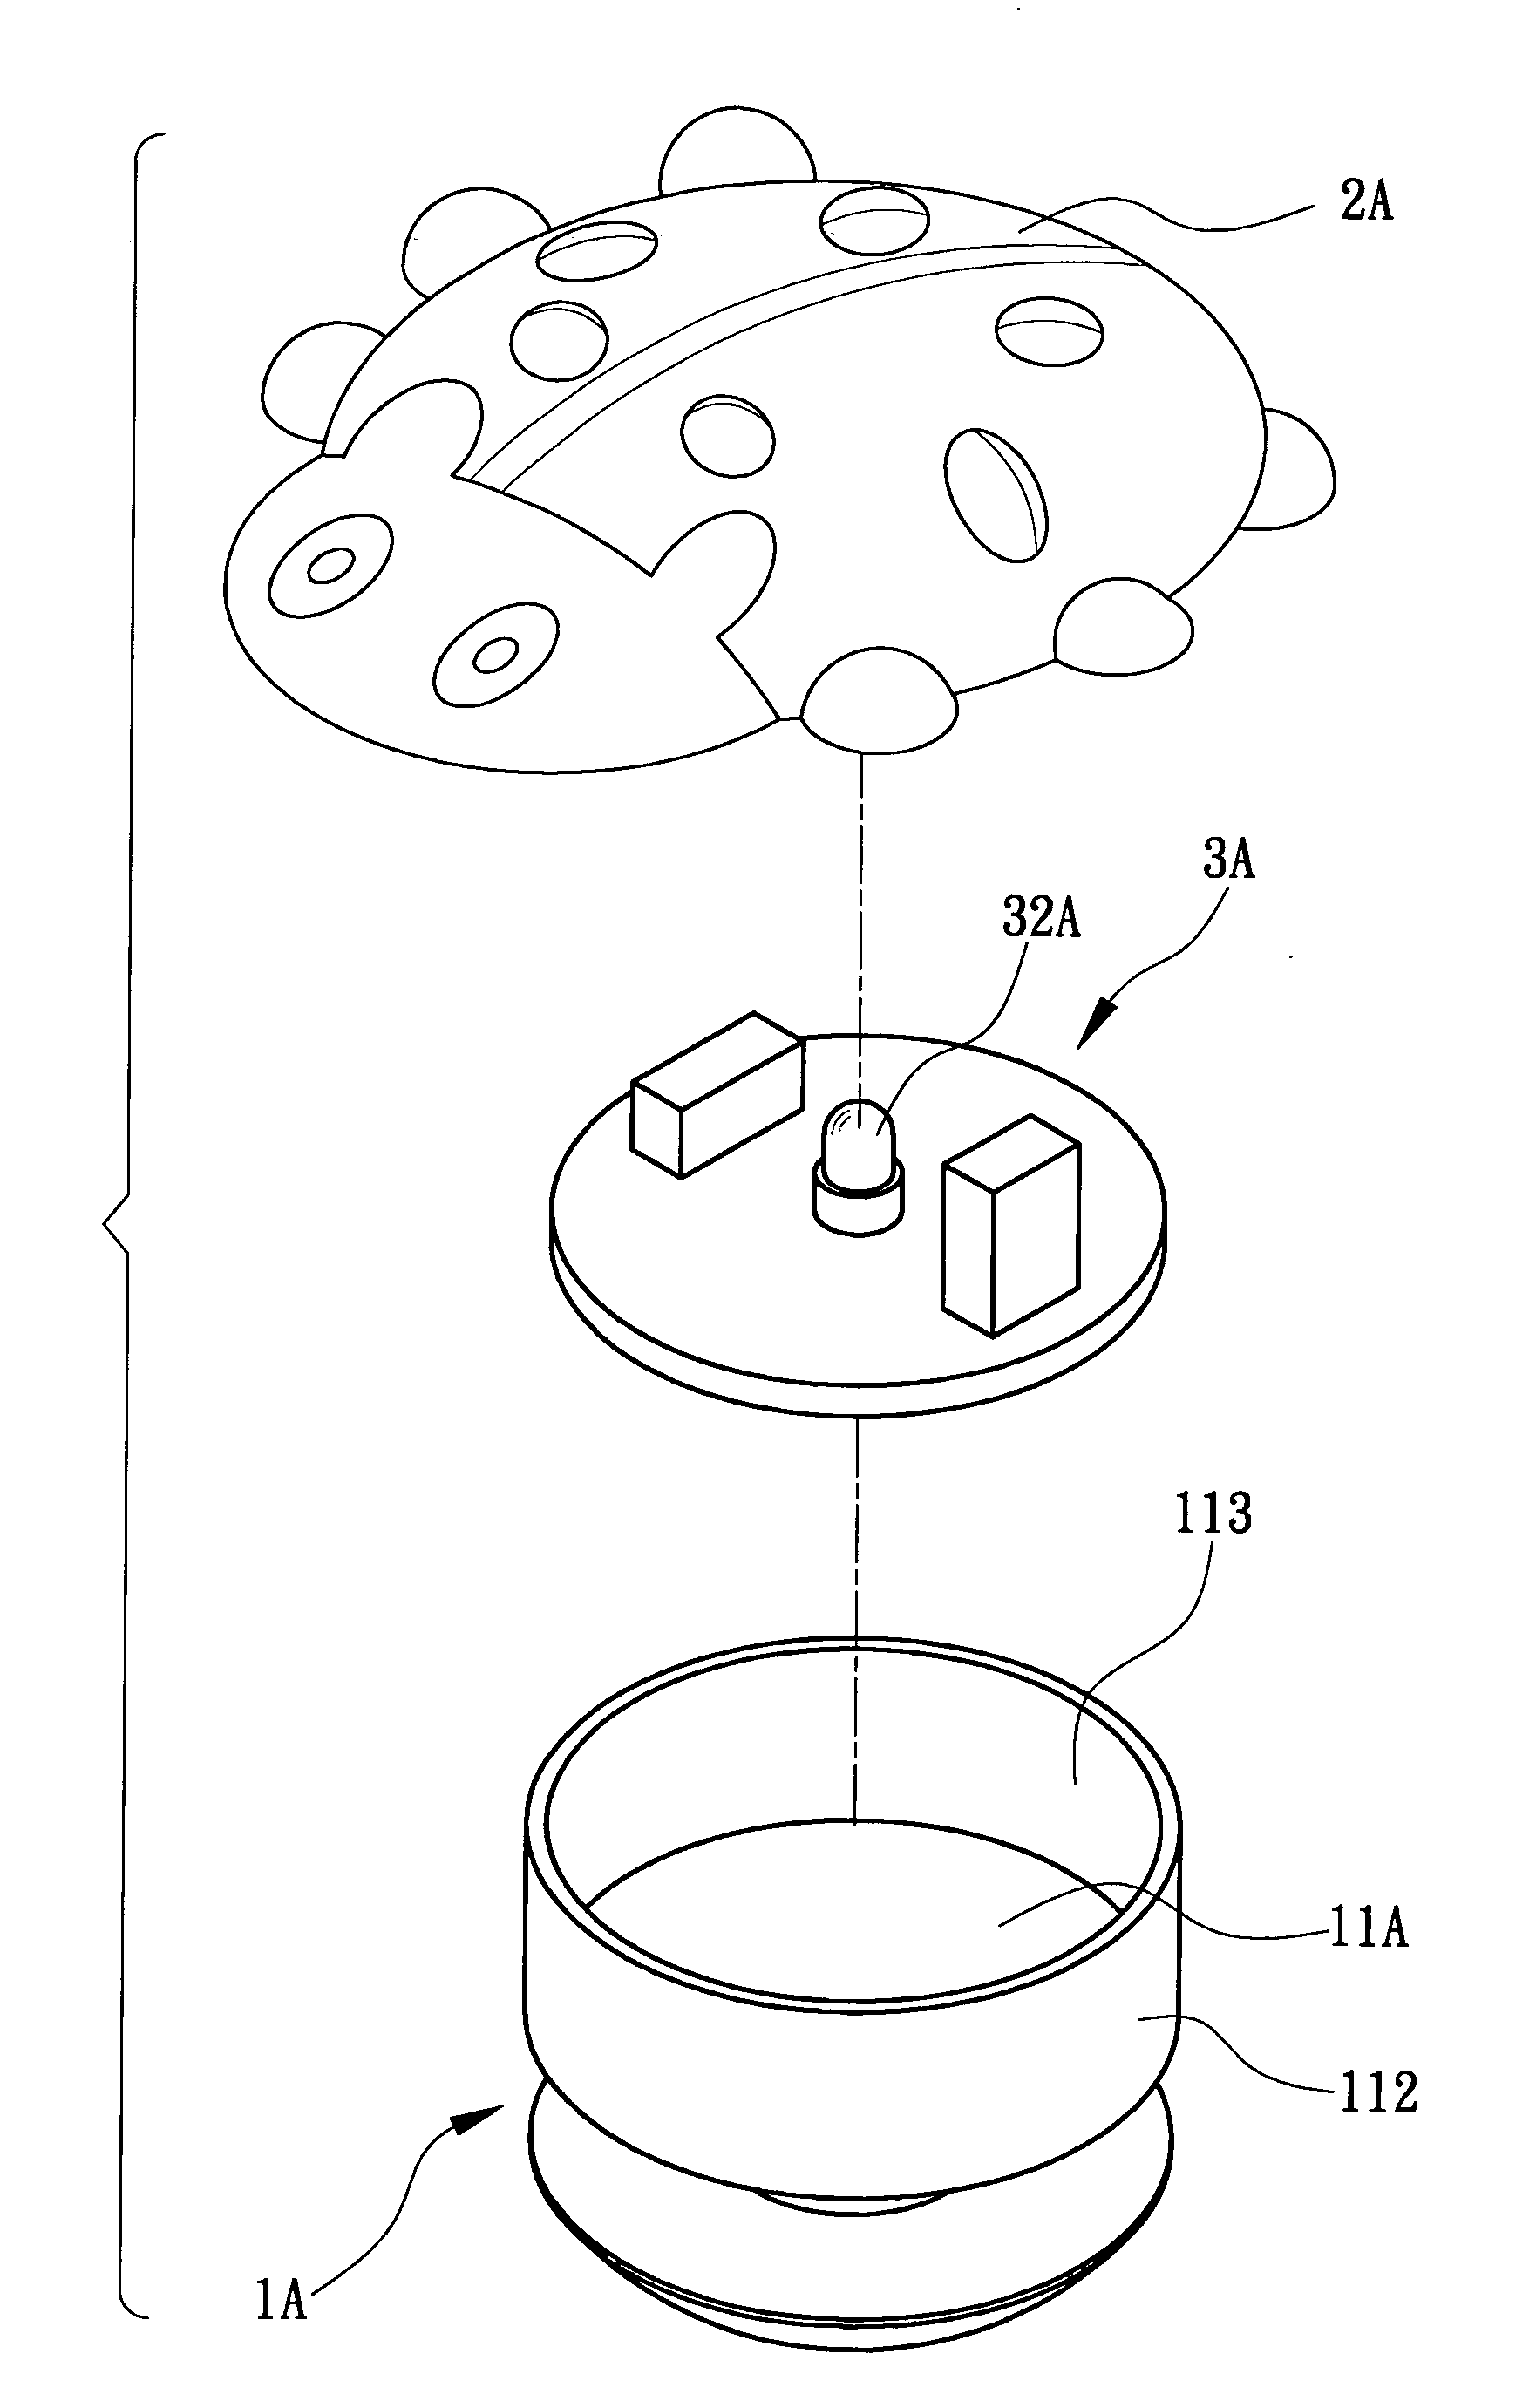 Decorative object connectable to a connected object